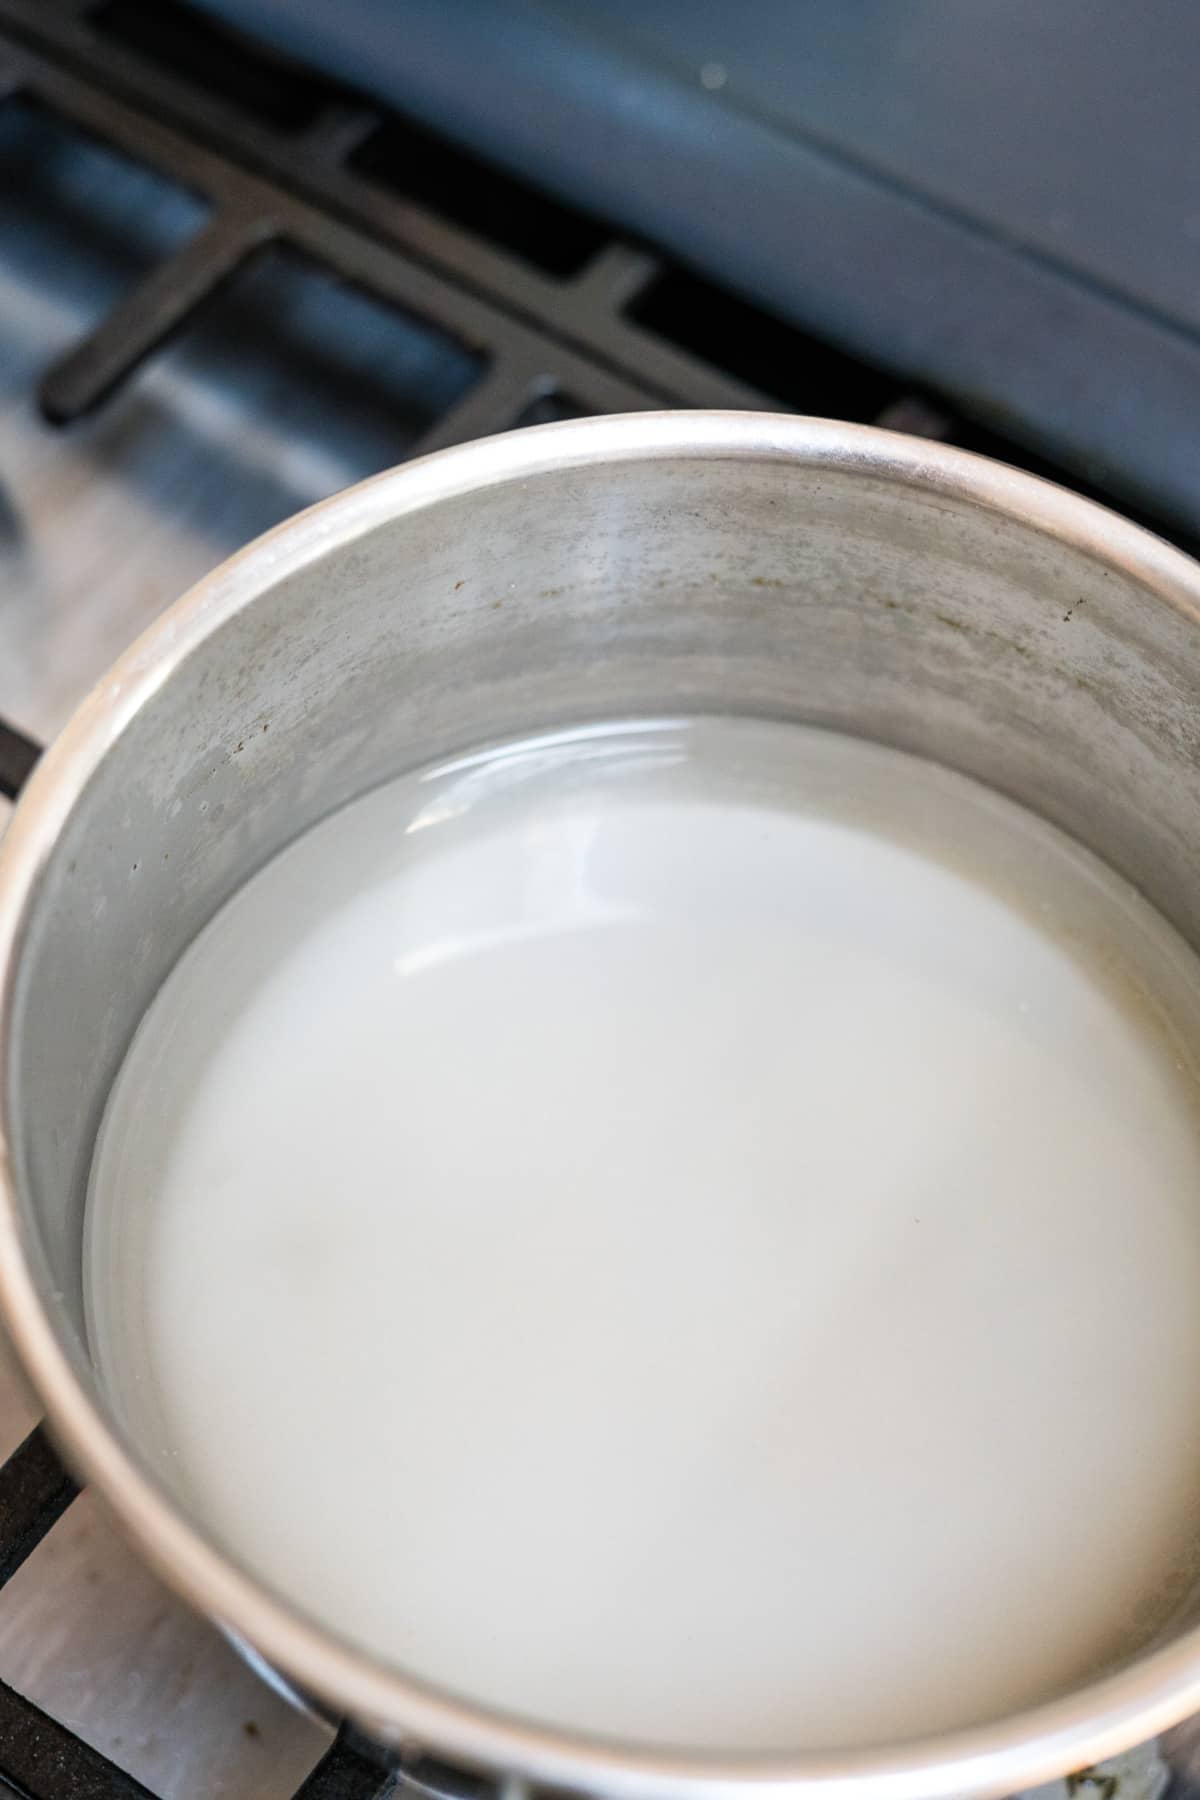 A bowl of milk sitting on top of a stove.